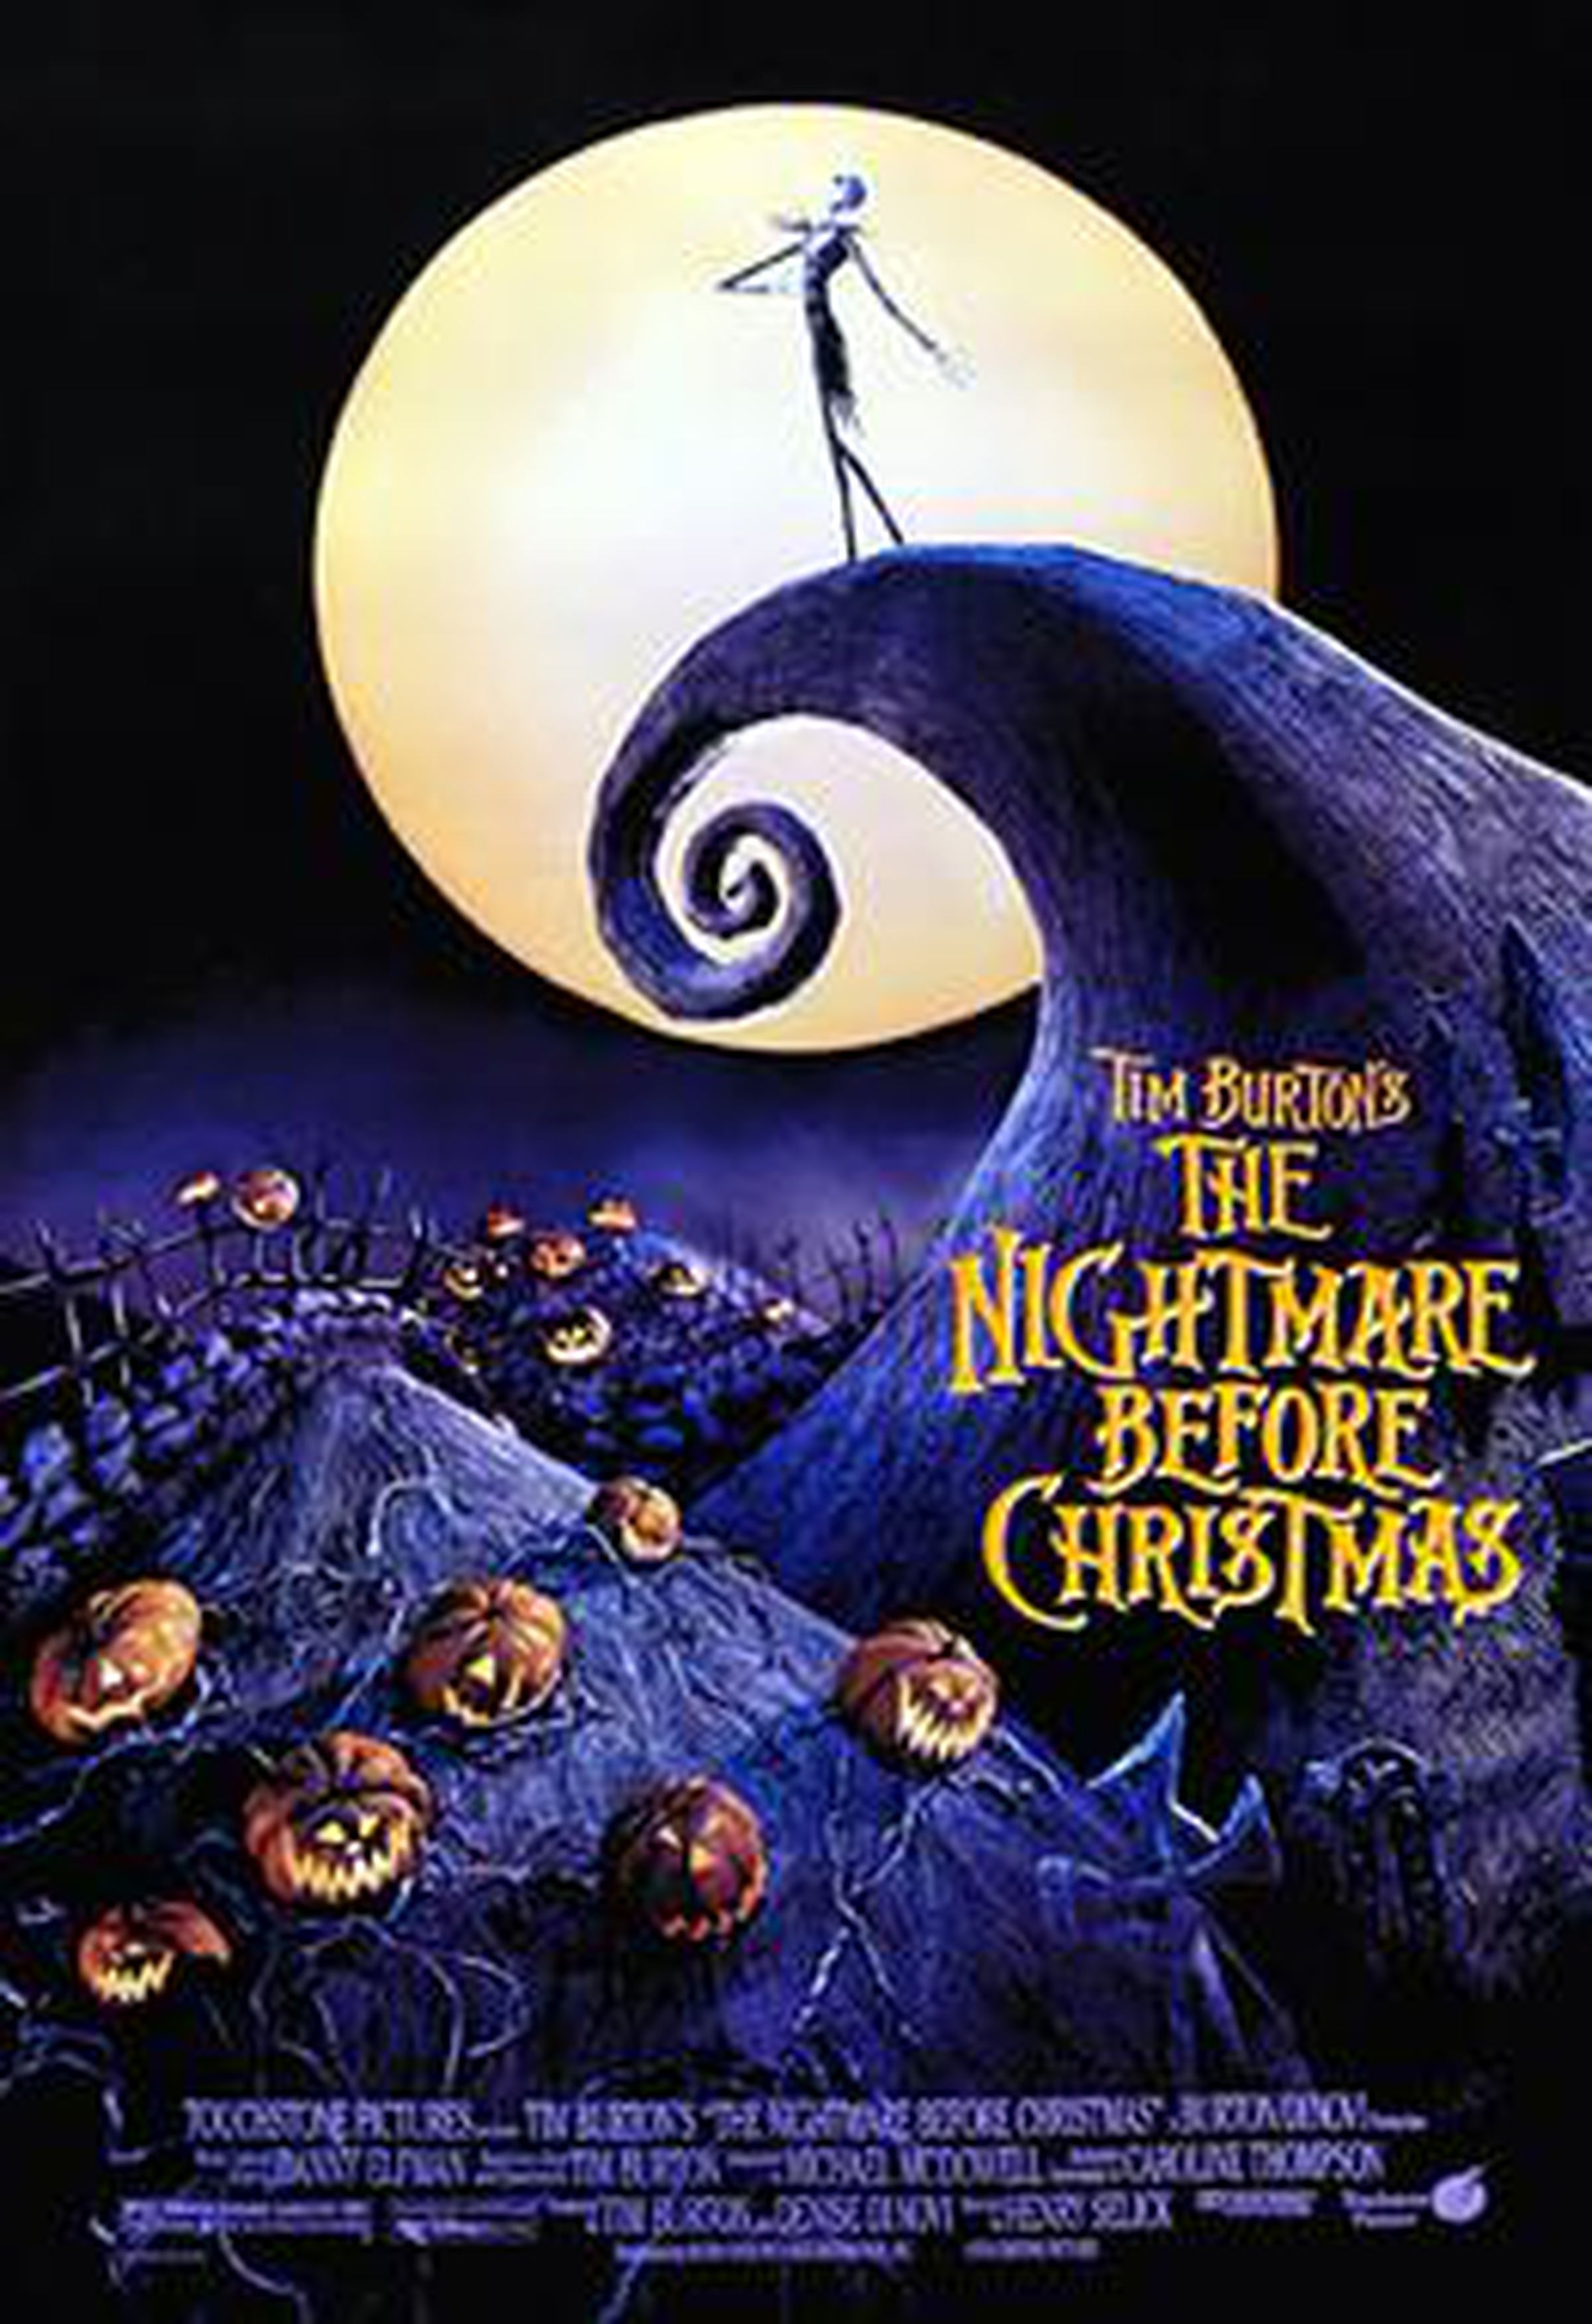 Poster for The Nightmare Before Christmas with a figure on a cliff before a full moon and a field of jack-o-lanterns